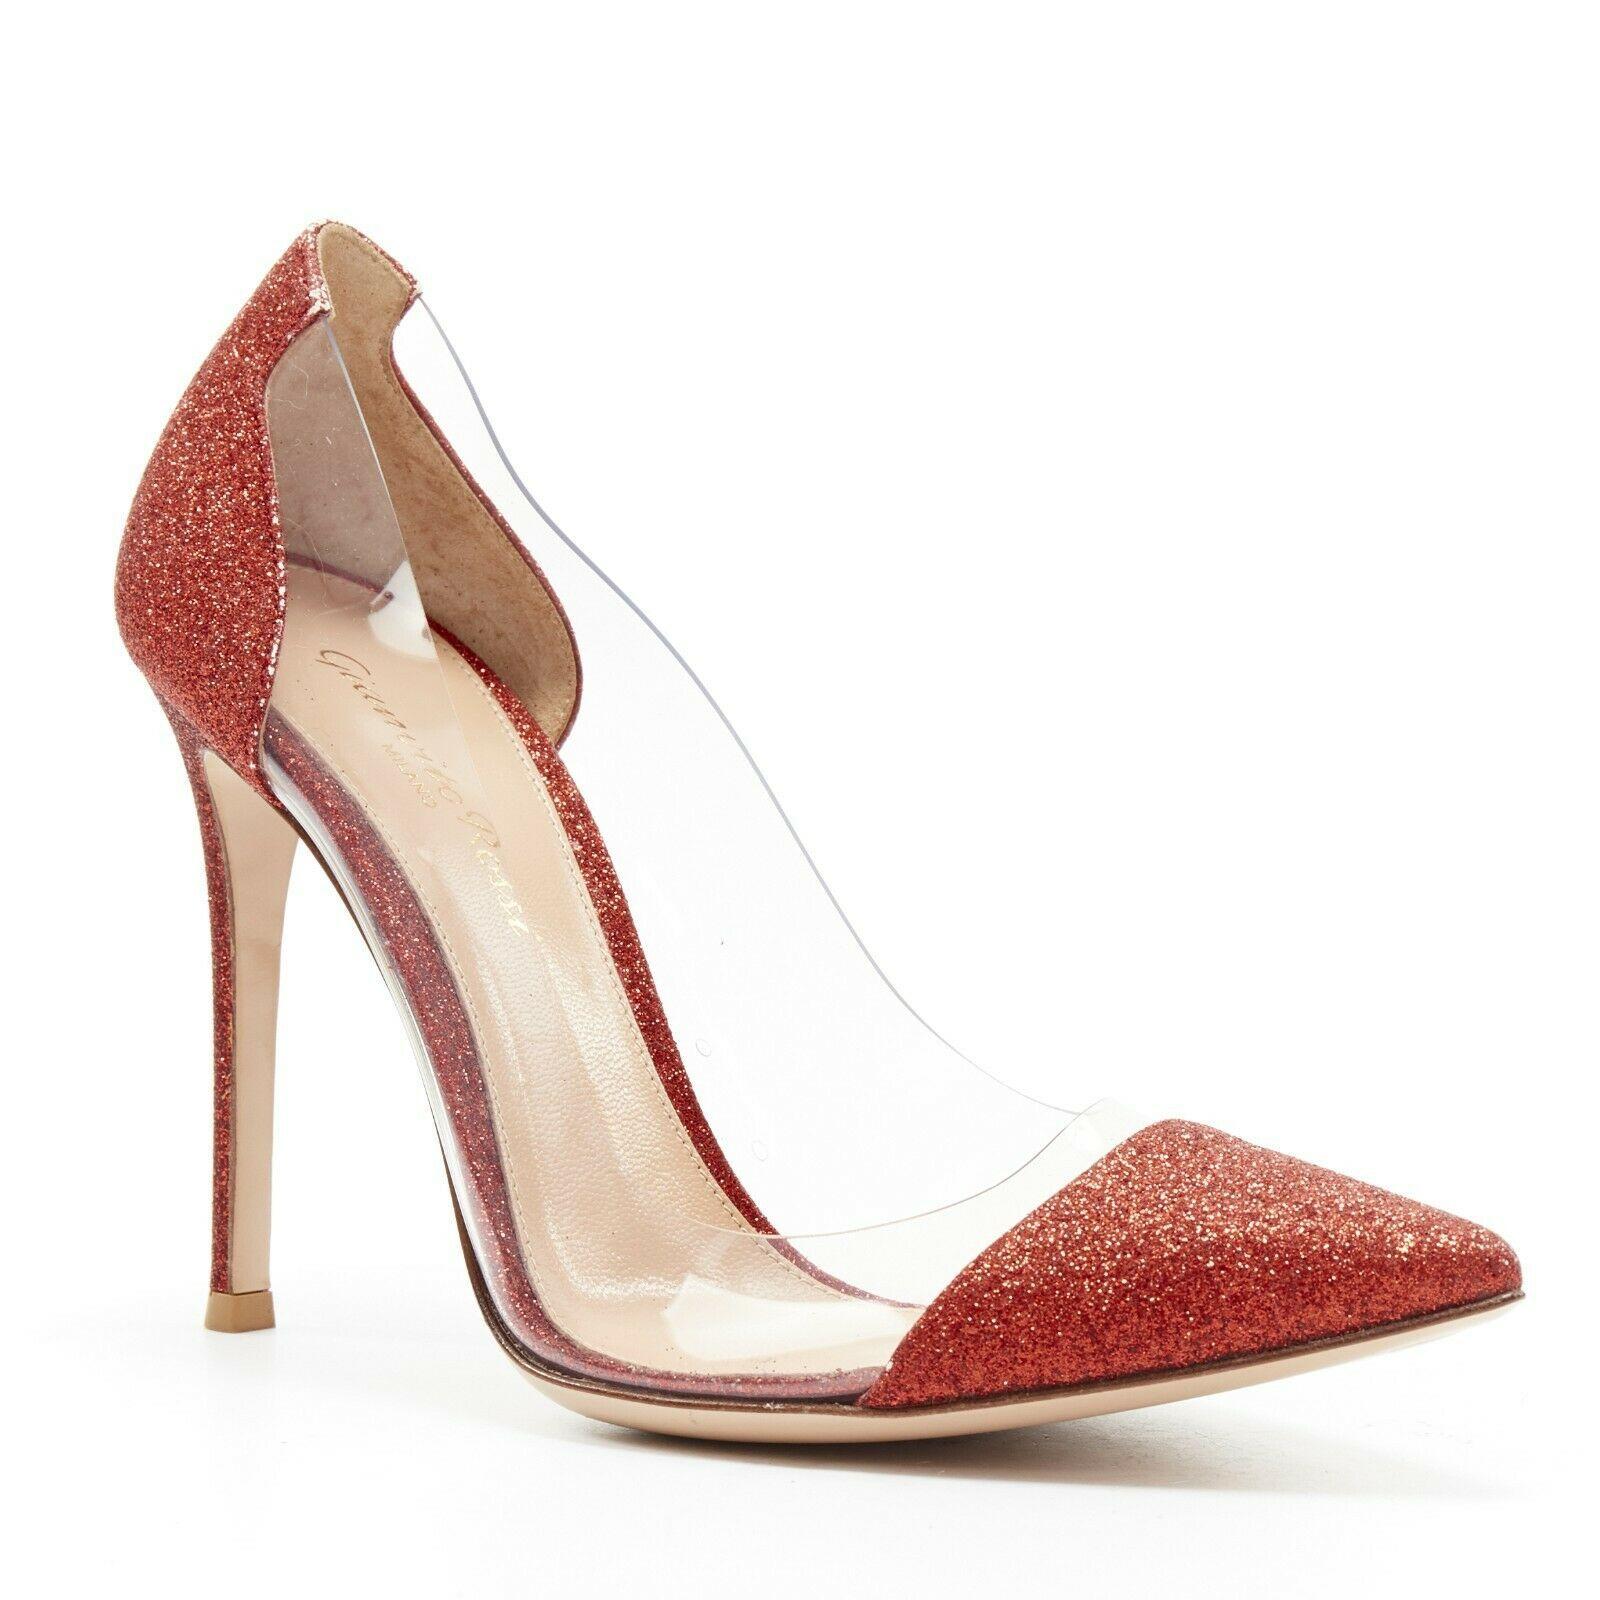 new GIANVITO ROSSI Plexi 100 red glitter leather clear PVC point toe pump EU37

GIANVITO ROSSI
Plexi 100. Red fine glitter covered leather. Clear PVC body. Pointed toe. Covered heel. Slim high heel. Padded leather lining. Leather sole. Made in